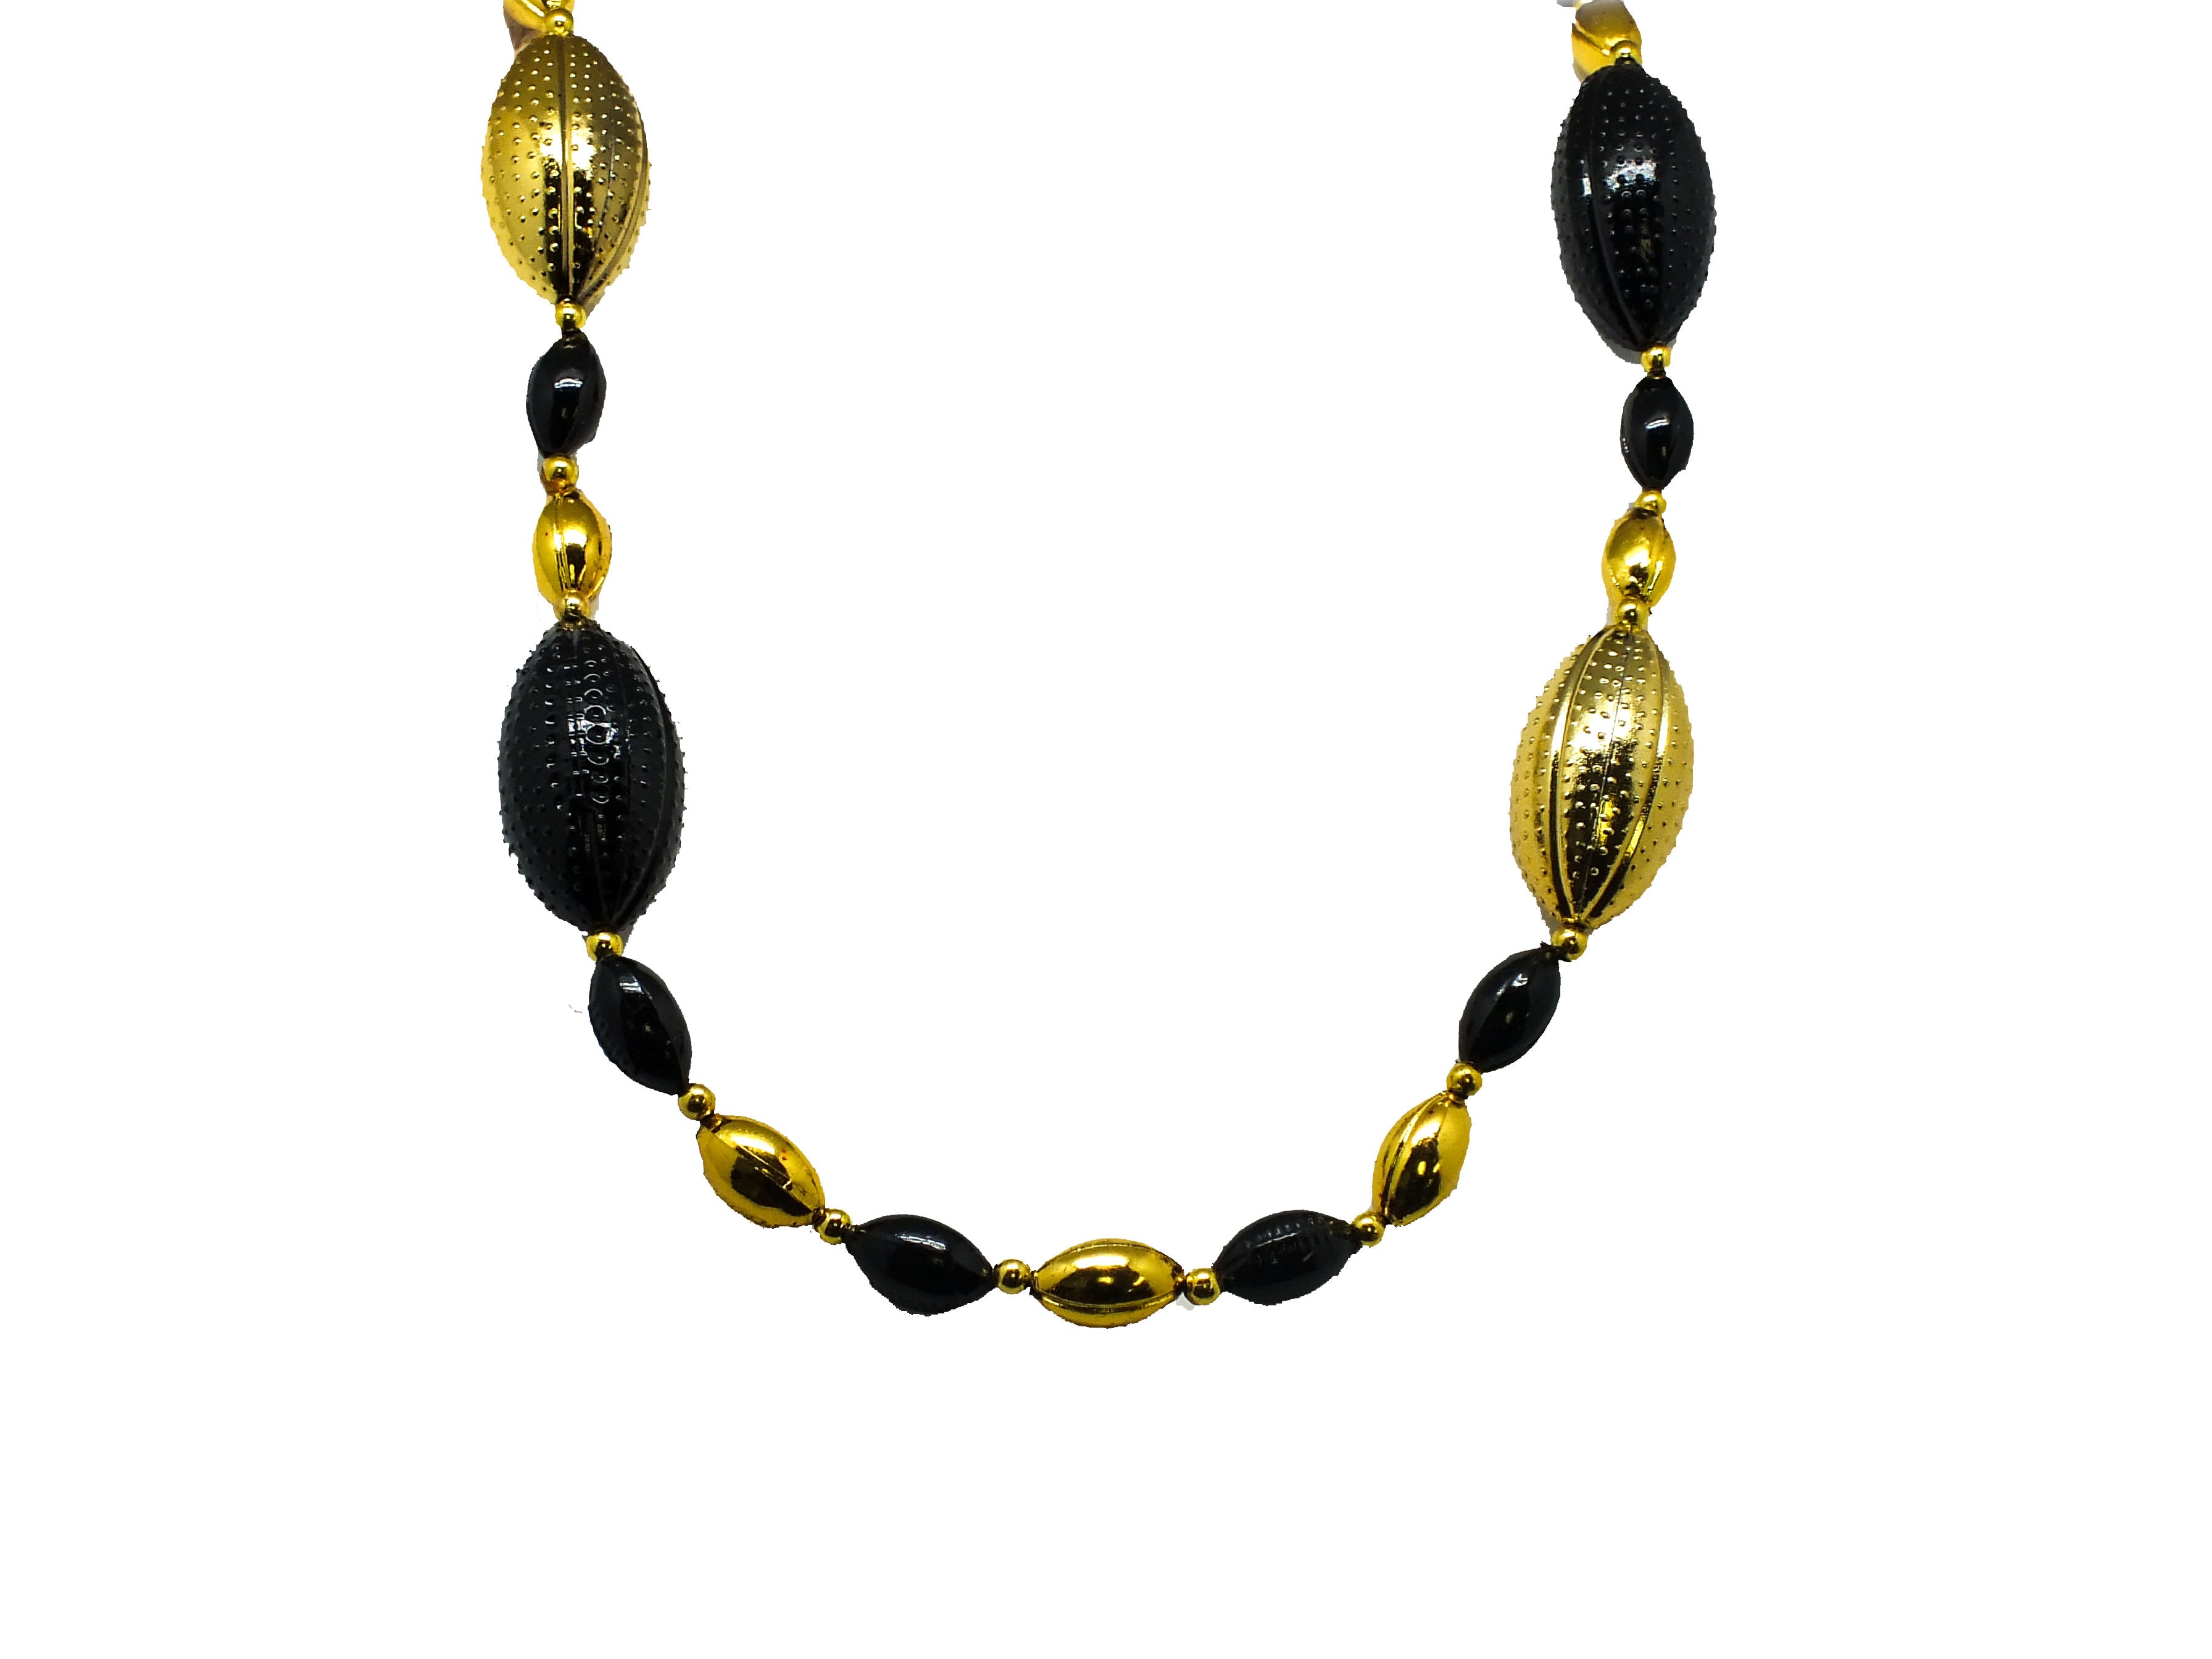 Black and Gold Football Beads